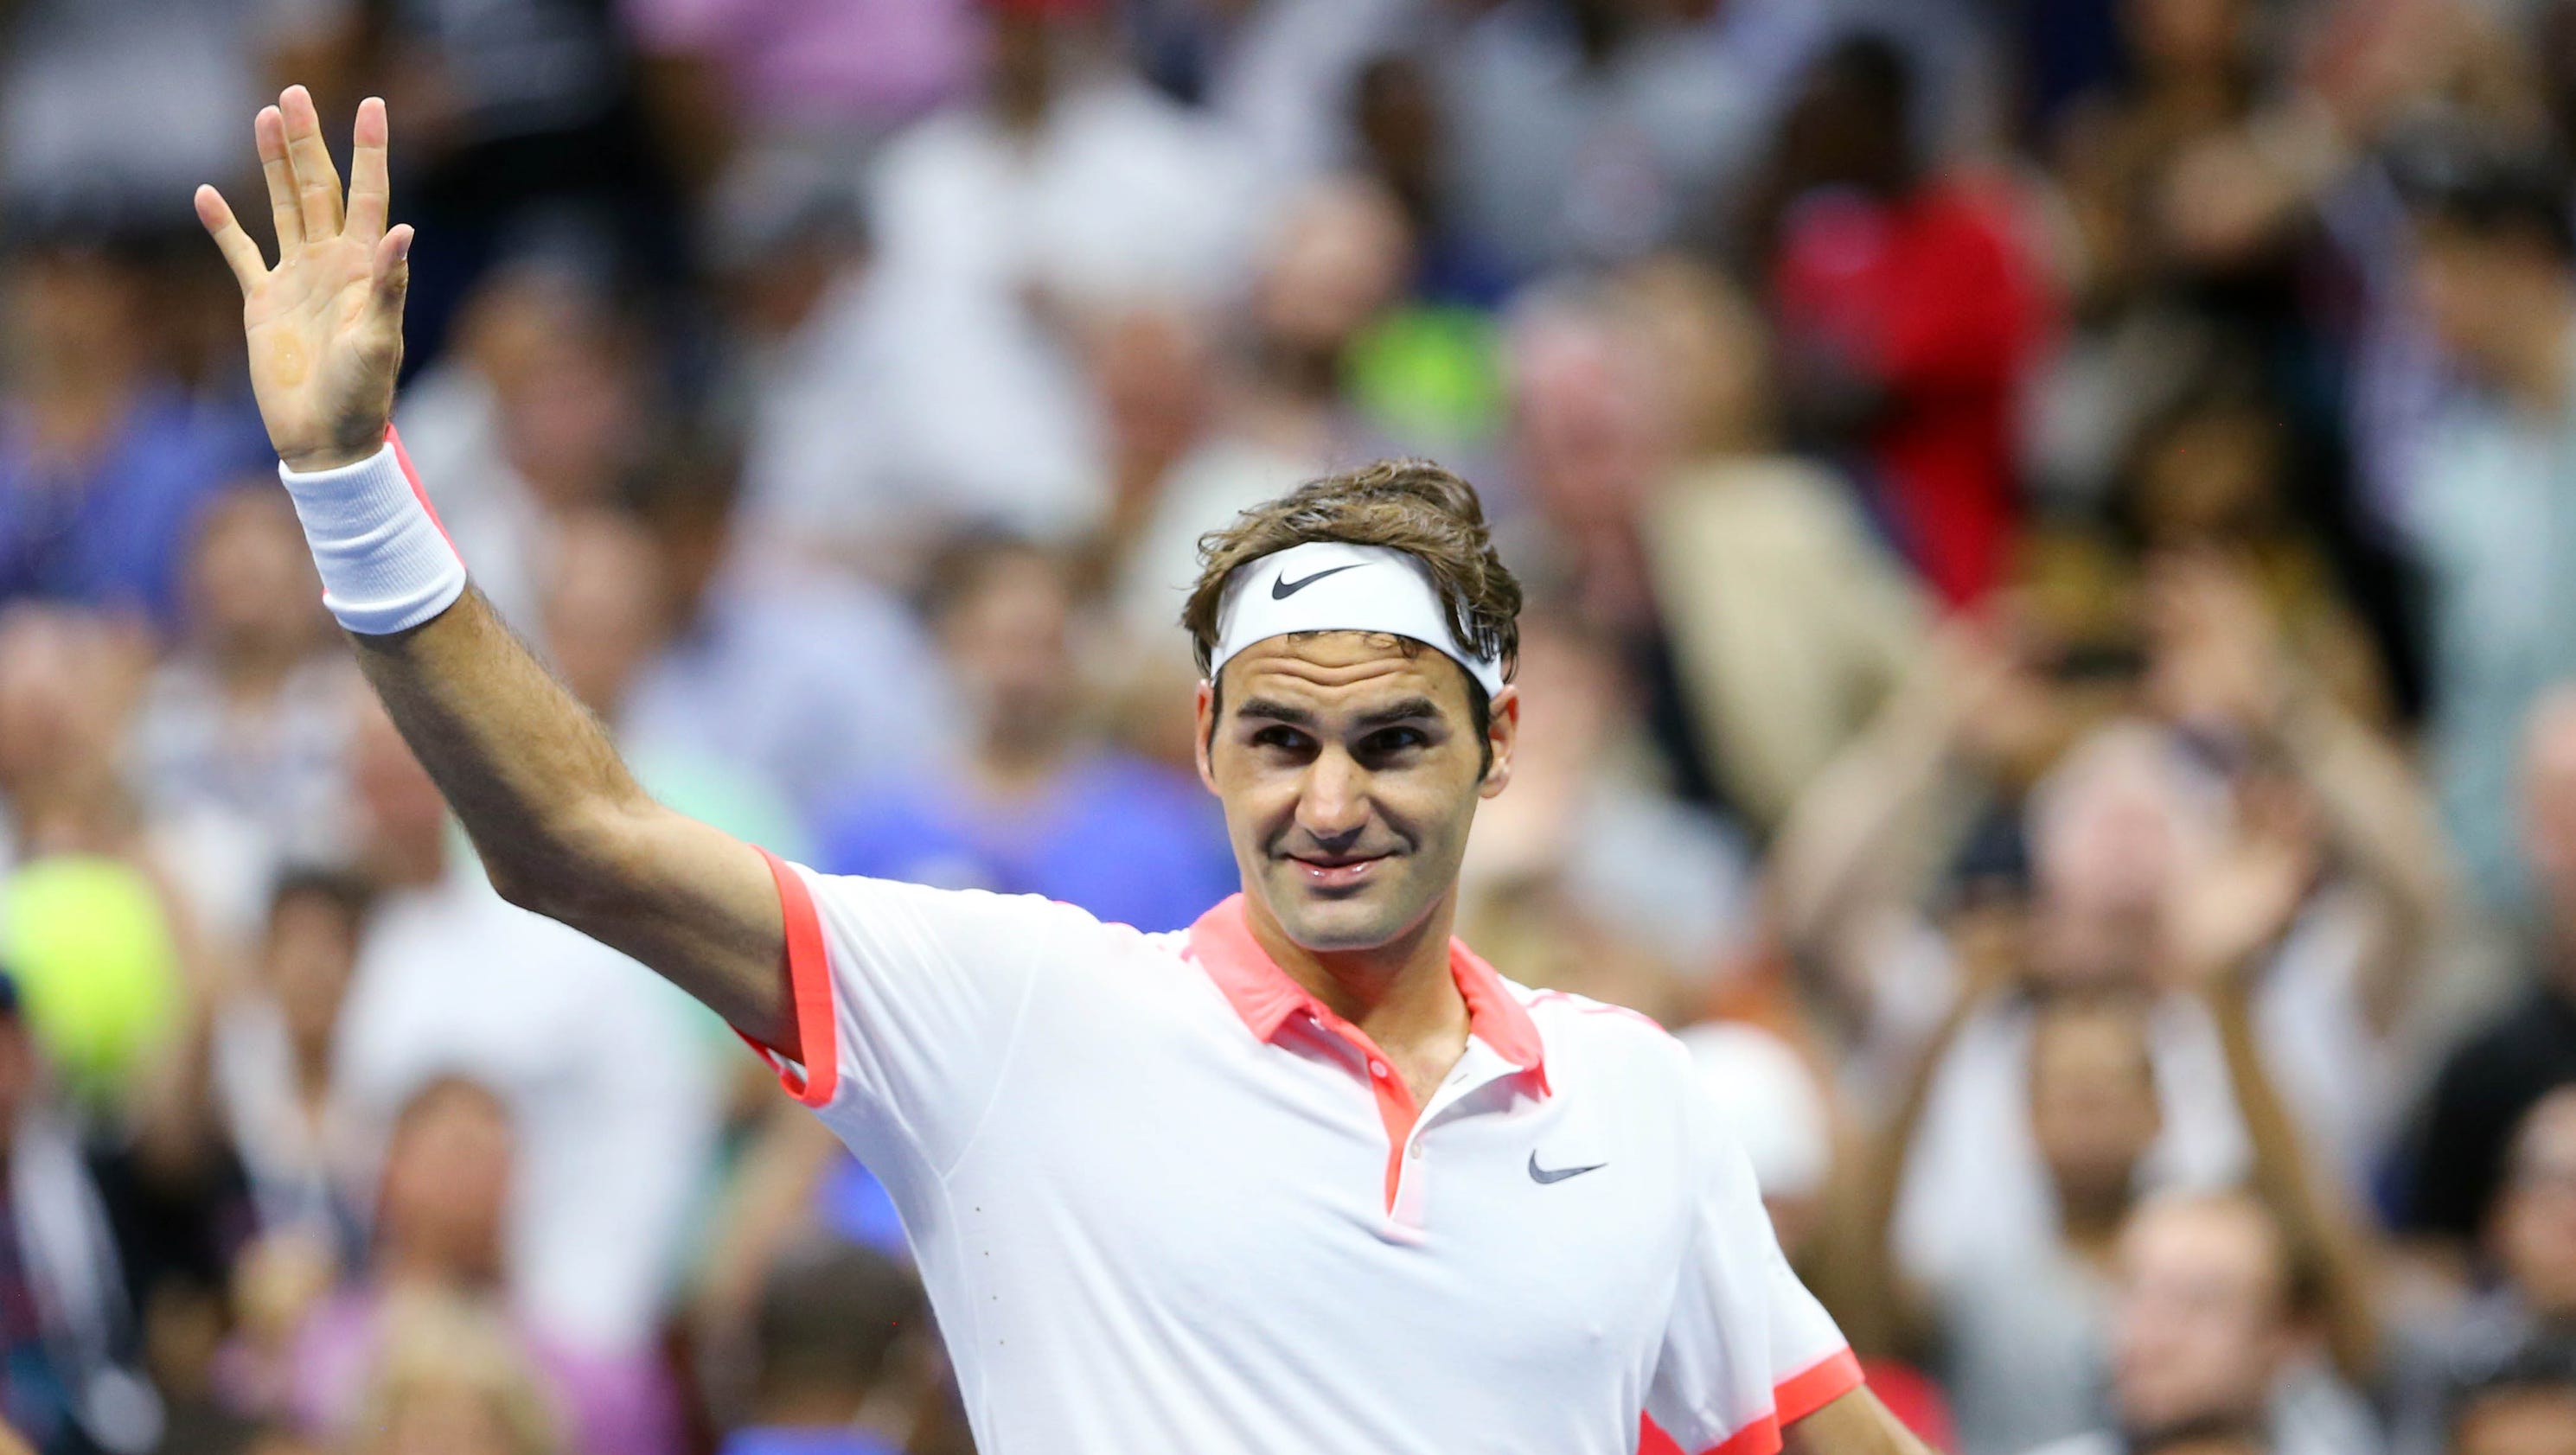 Roger Federer beats John Isner in electric match to advance to quarterfinals3200 x 1680